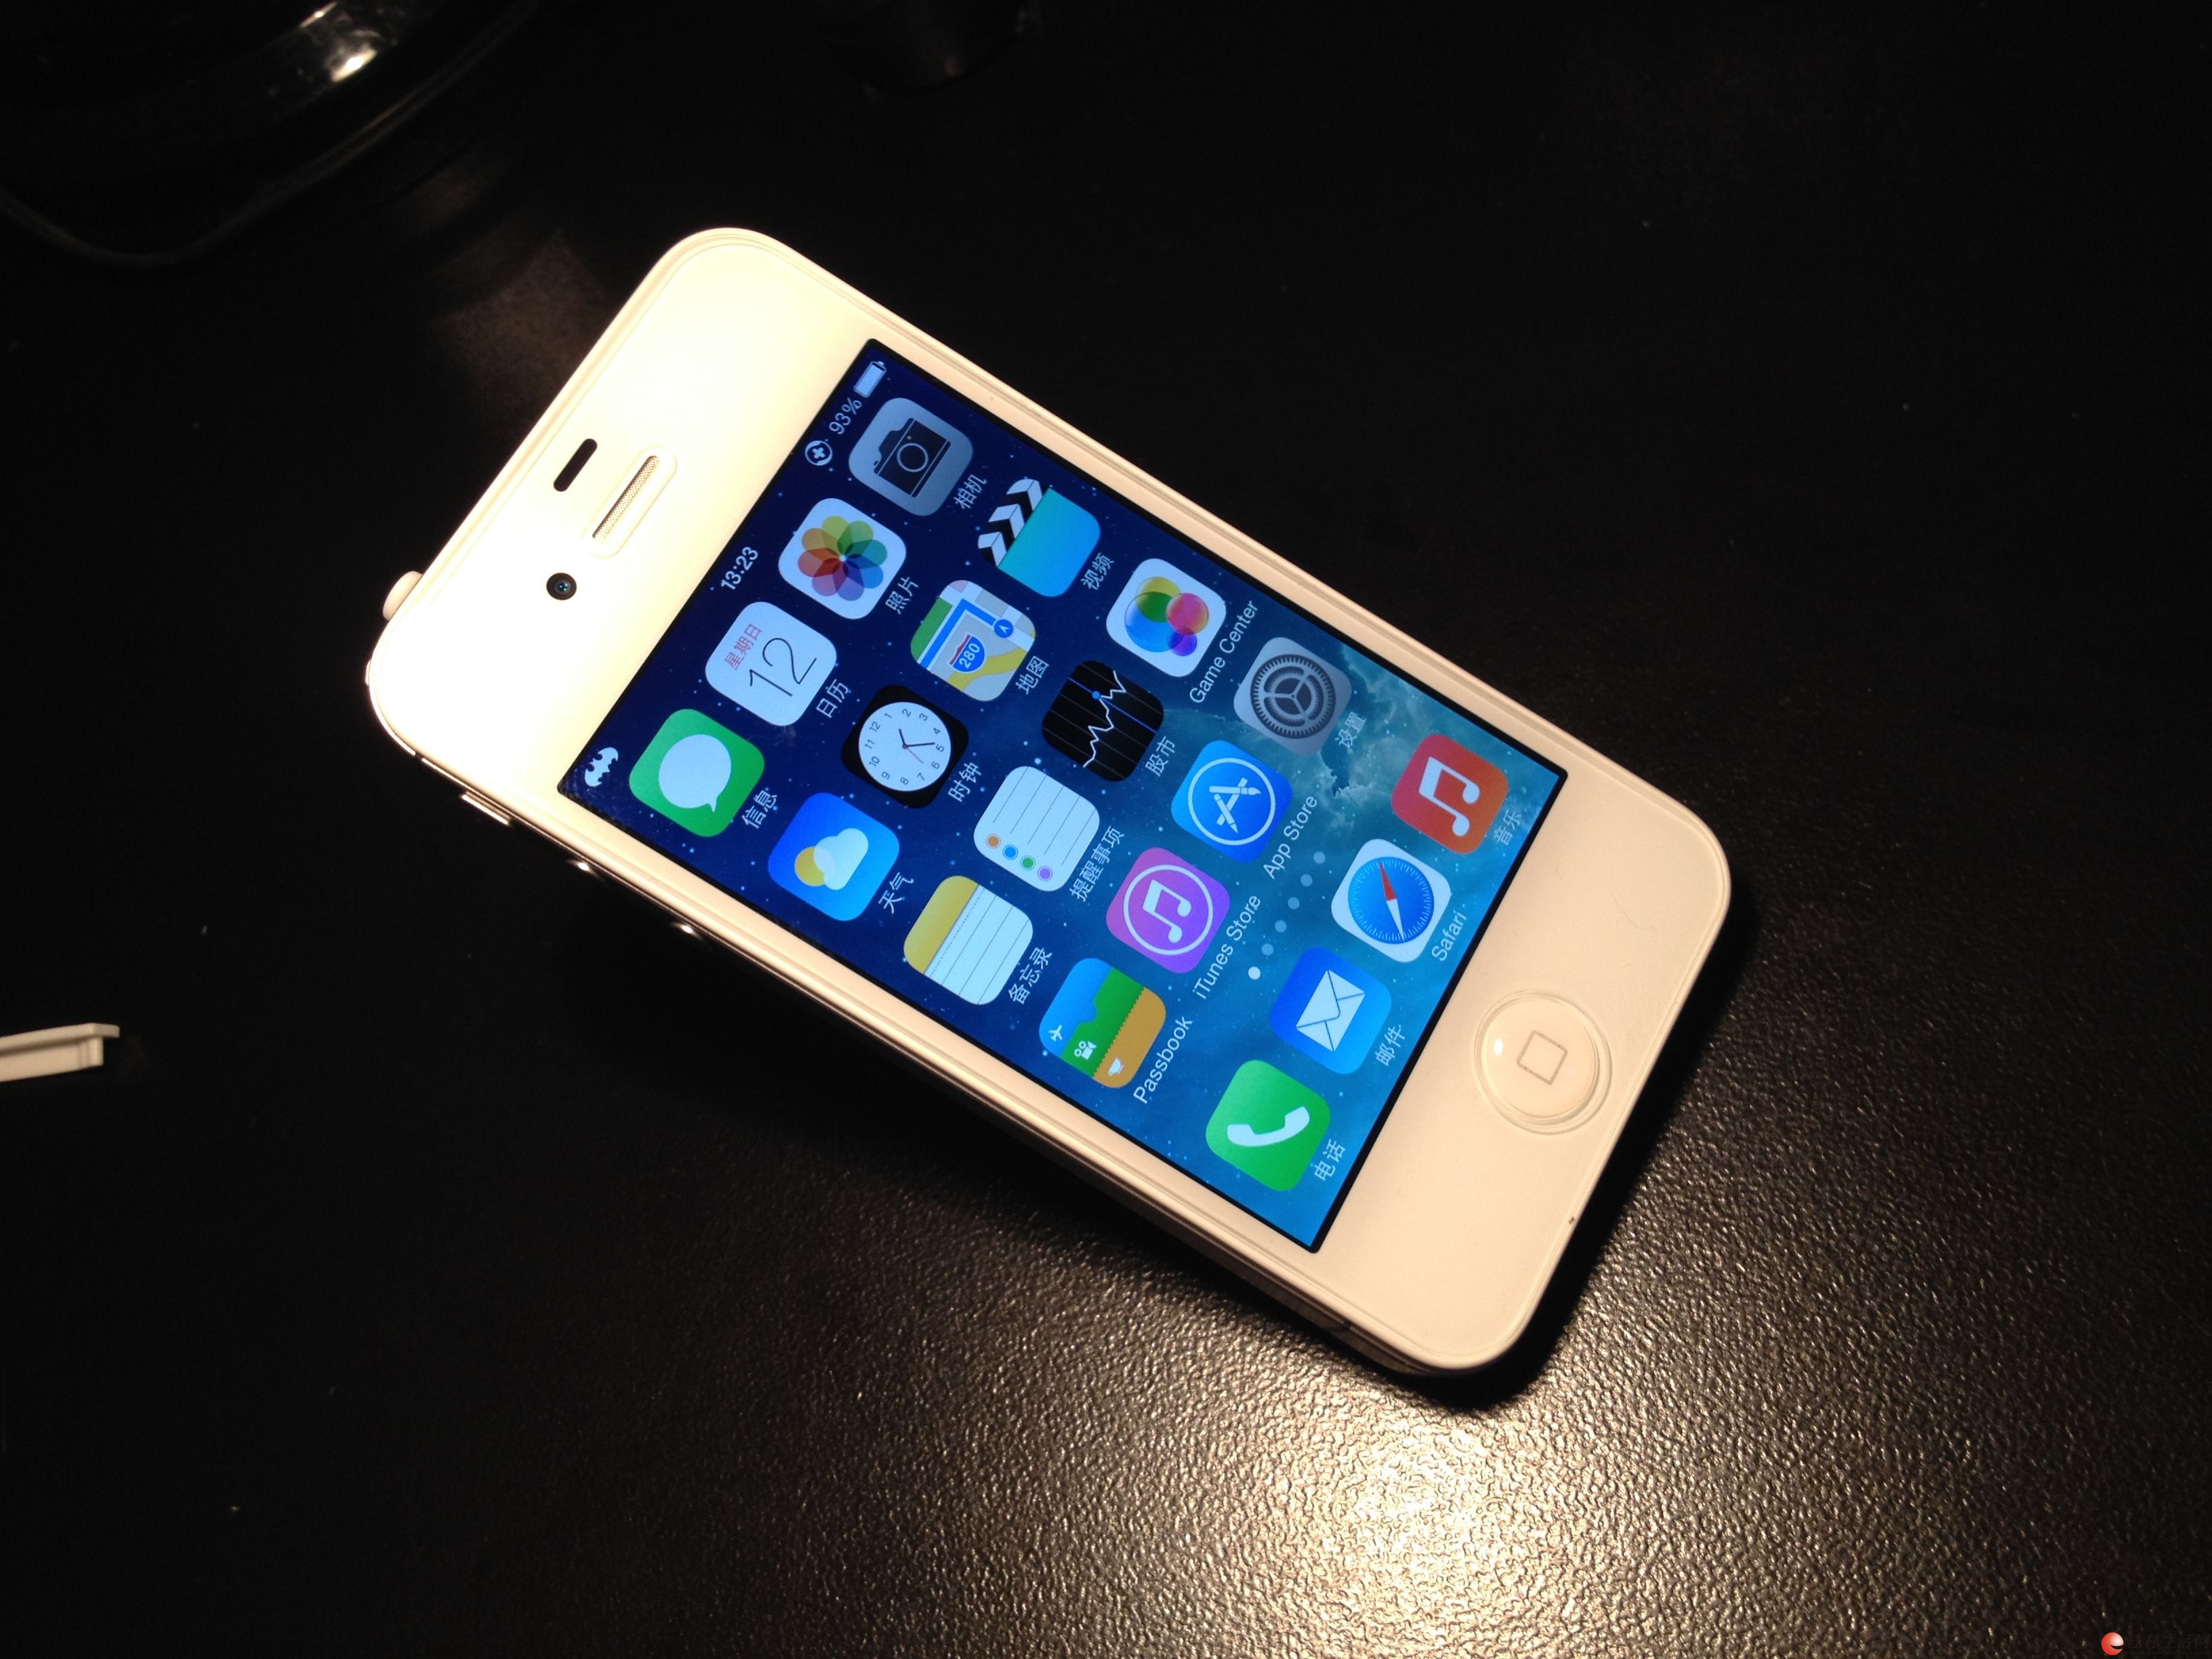 iPhone 4S Features, Release Date, Specs in Detail - Phones Counter